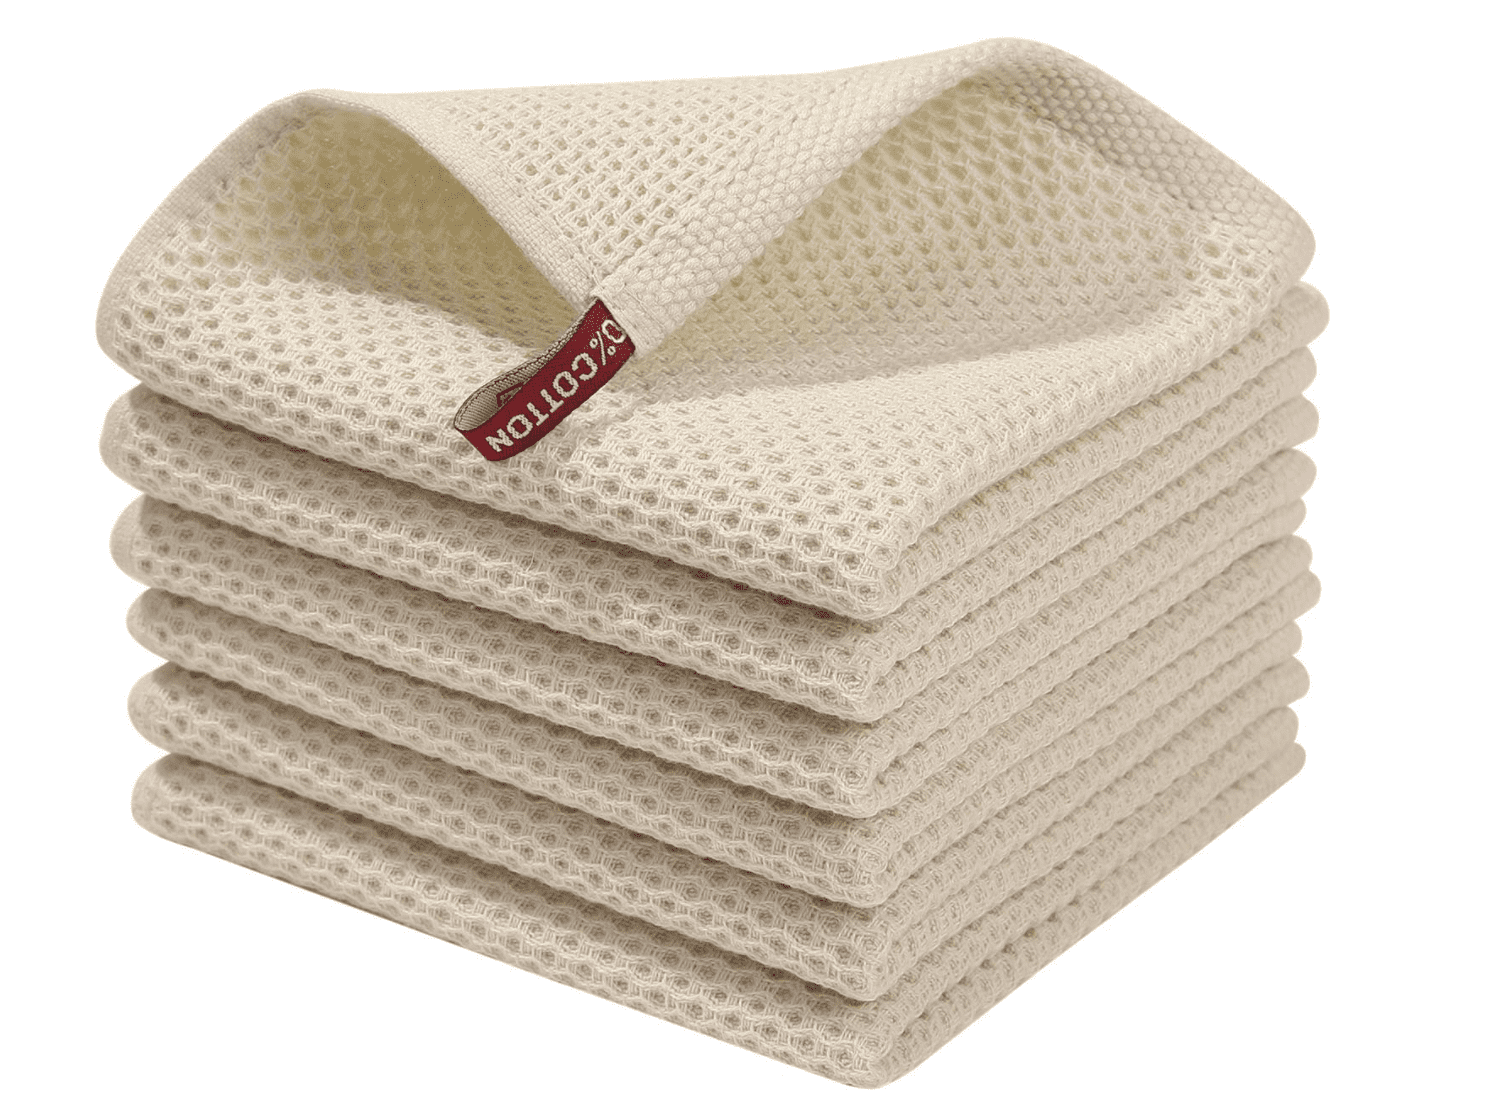 https://cdn.apartmenttherapy.info/image/upload/v1617895764/gen-workflow/product-database/Waffle%20Weave%20Dishcloth.png